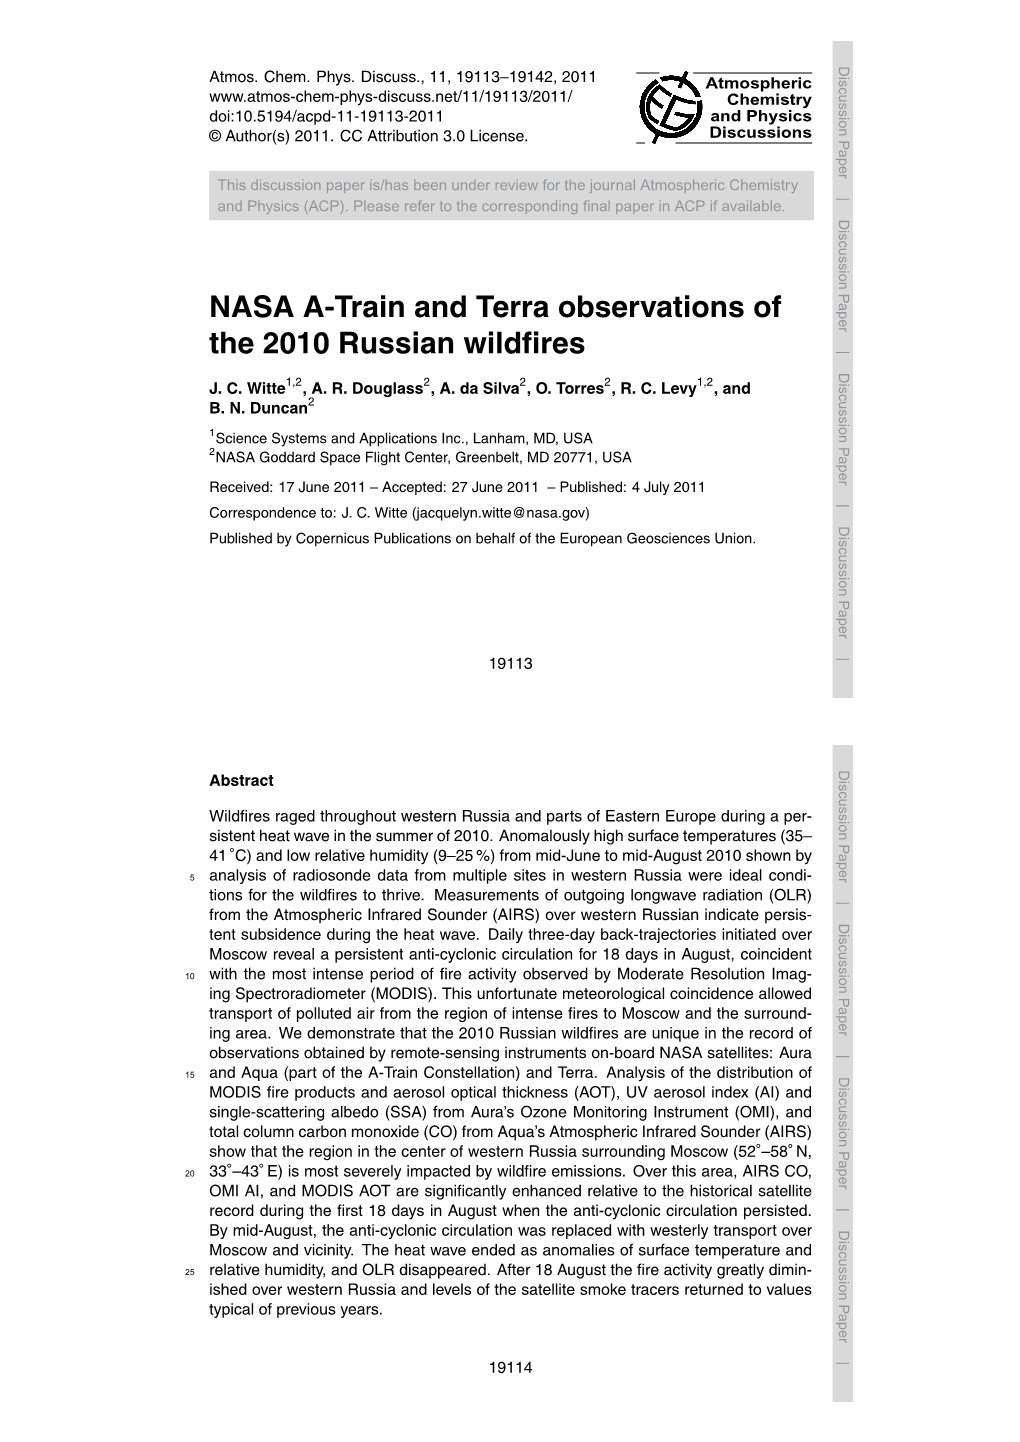 NASA A-Train and Terra Observations of the 2010 Russian Wildfires